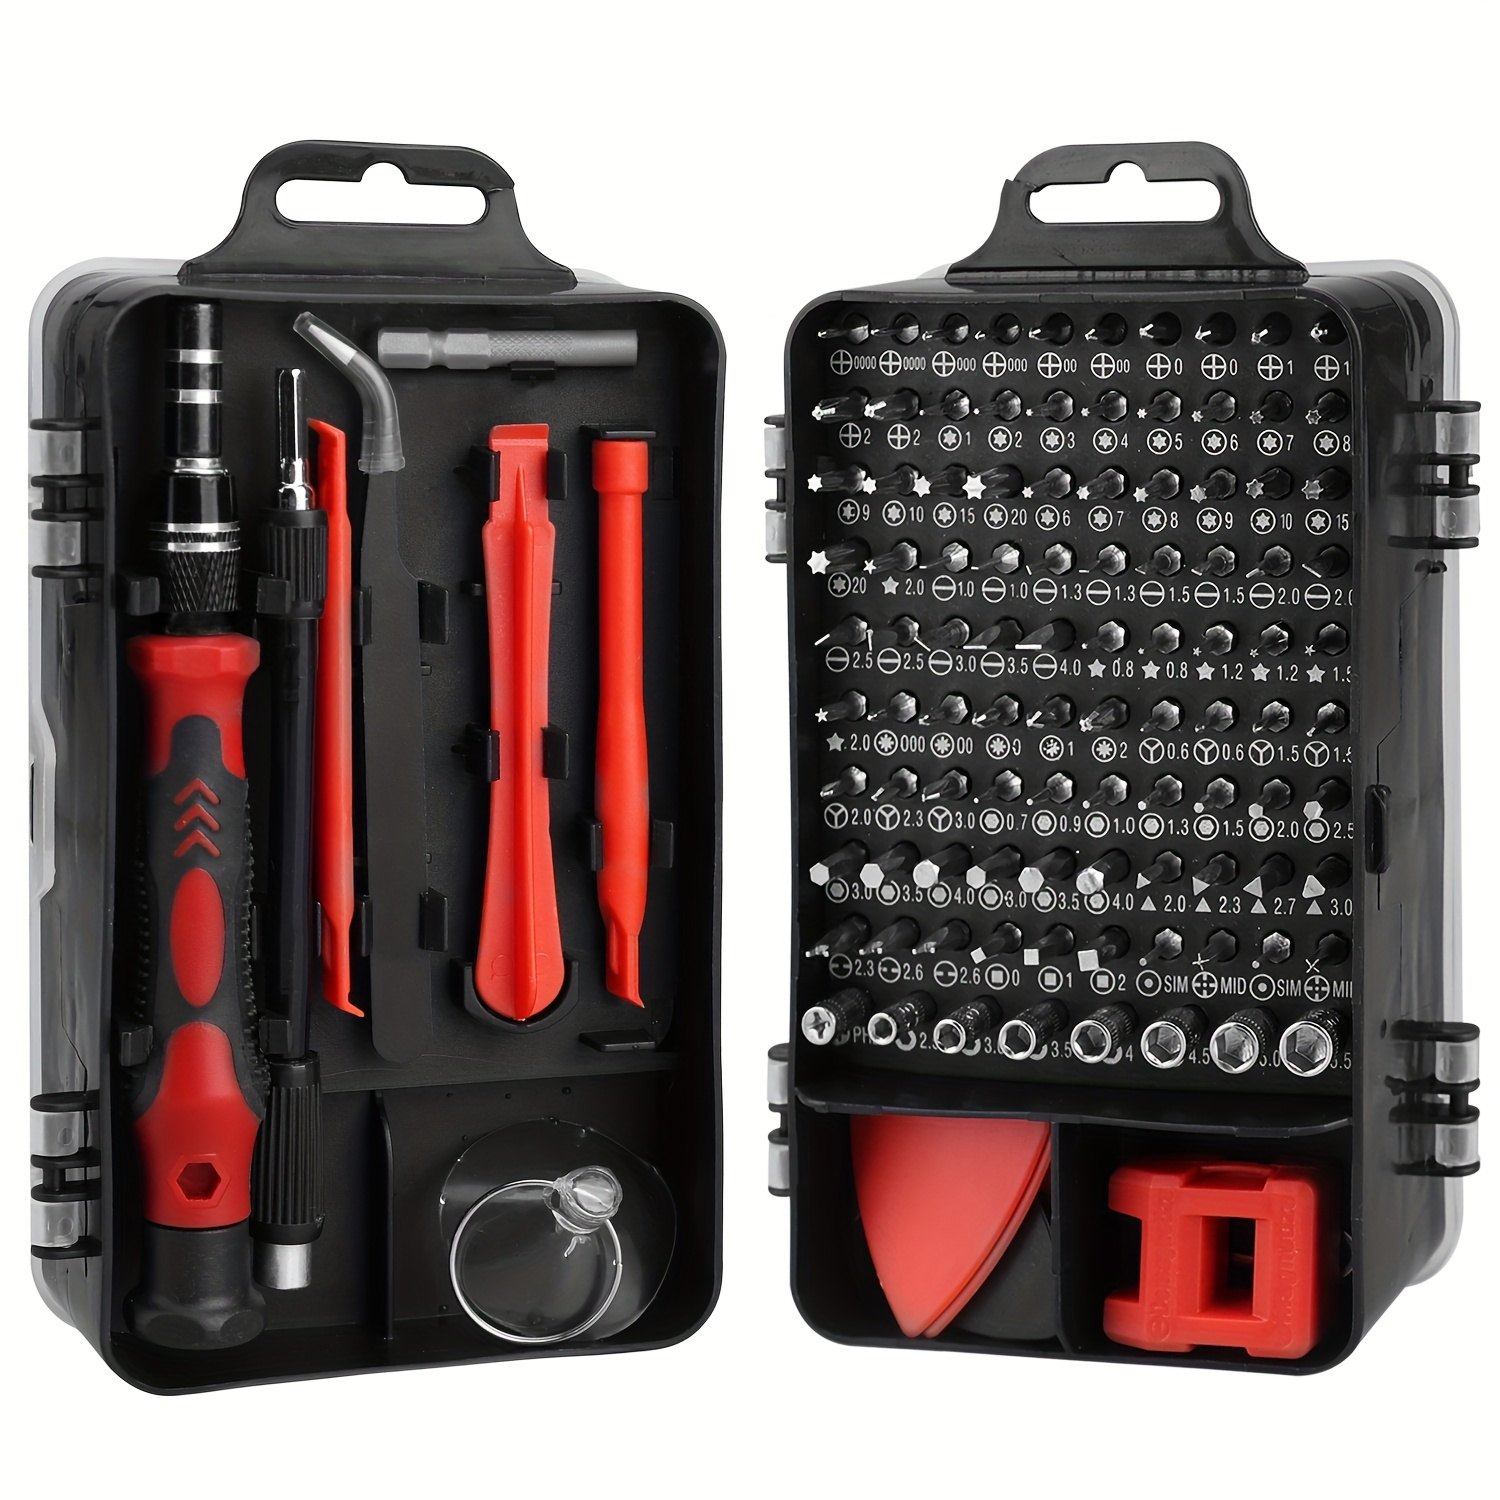 

115-piece Precision Screwdriver Set - Chrome Vanadium Steel, Manual Operation | Perfect For Cell Phones, Laptops & Cameras | Ideal Home Repair Kit For Tech Enthusiasts